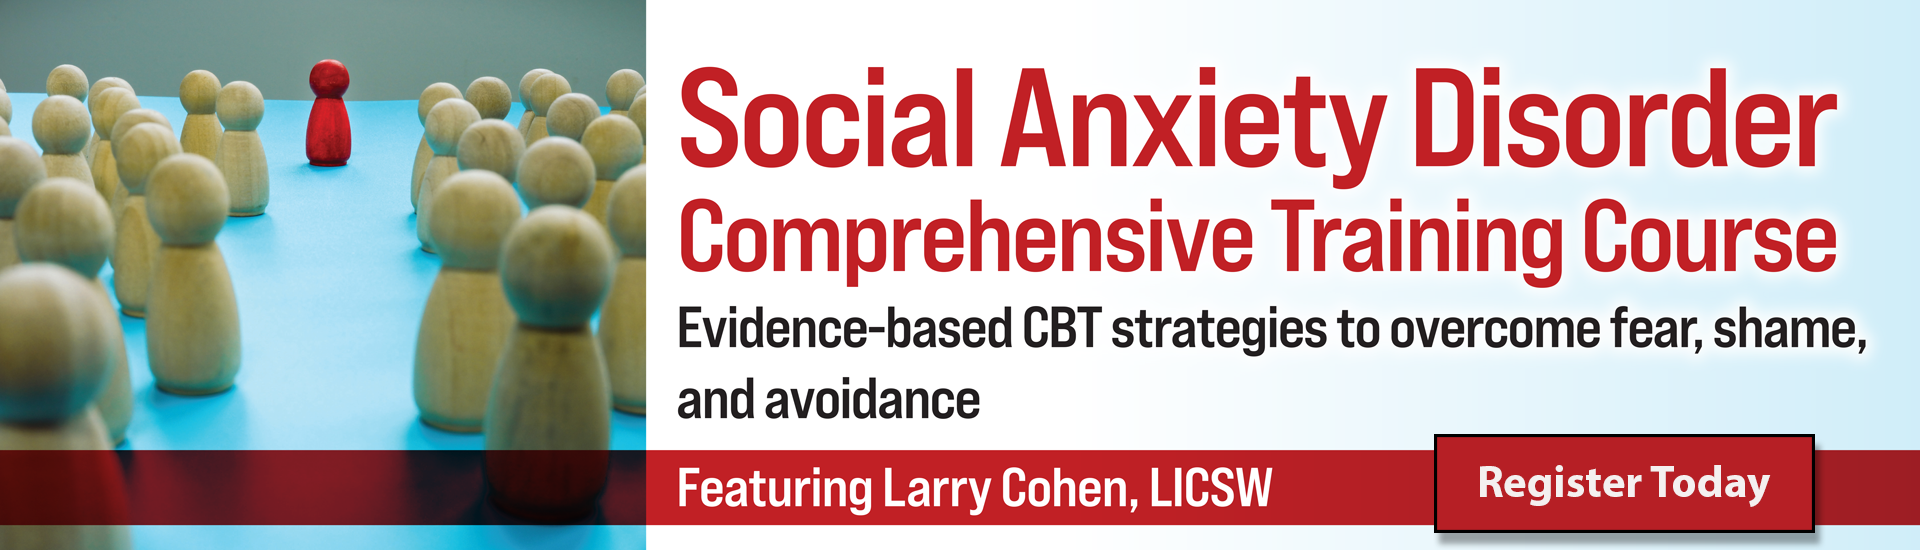 Social Anxiety Disorder Comprehensive Training Course: Evidence-based CBT strategies to overcome fear, shame, and avoidance